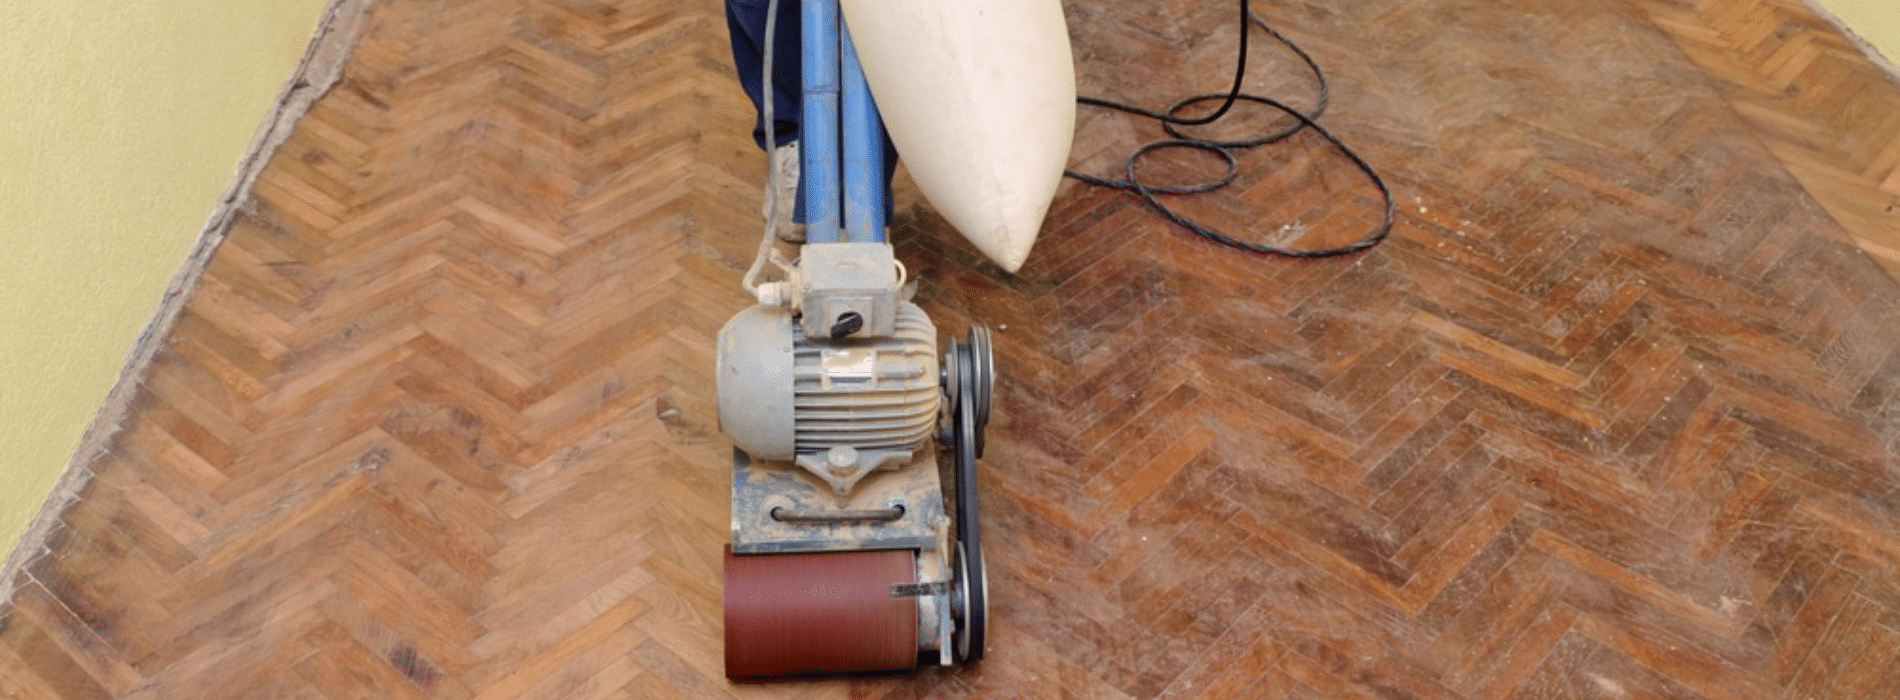 Mr Sander® using a Bona Scorpion, a 200mm drum sander, for sanding a herringbone floor in Upper Edmonton, N18. With a power of 1.5 kW, operating at 240V and 50Hz, they ensure a clean and efficient result by connecting it to a dust extraction system equipped with a HEPA filter.